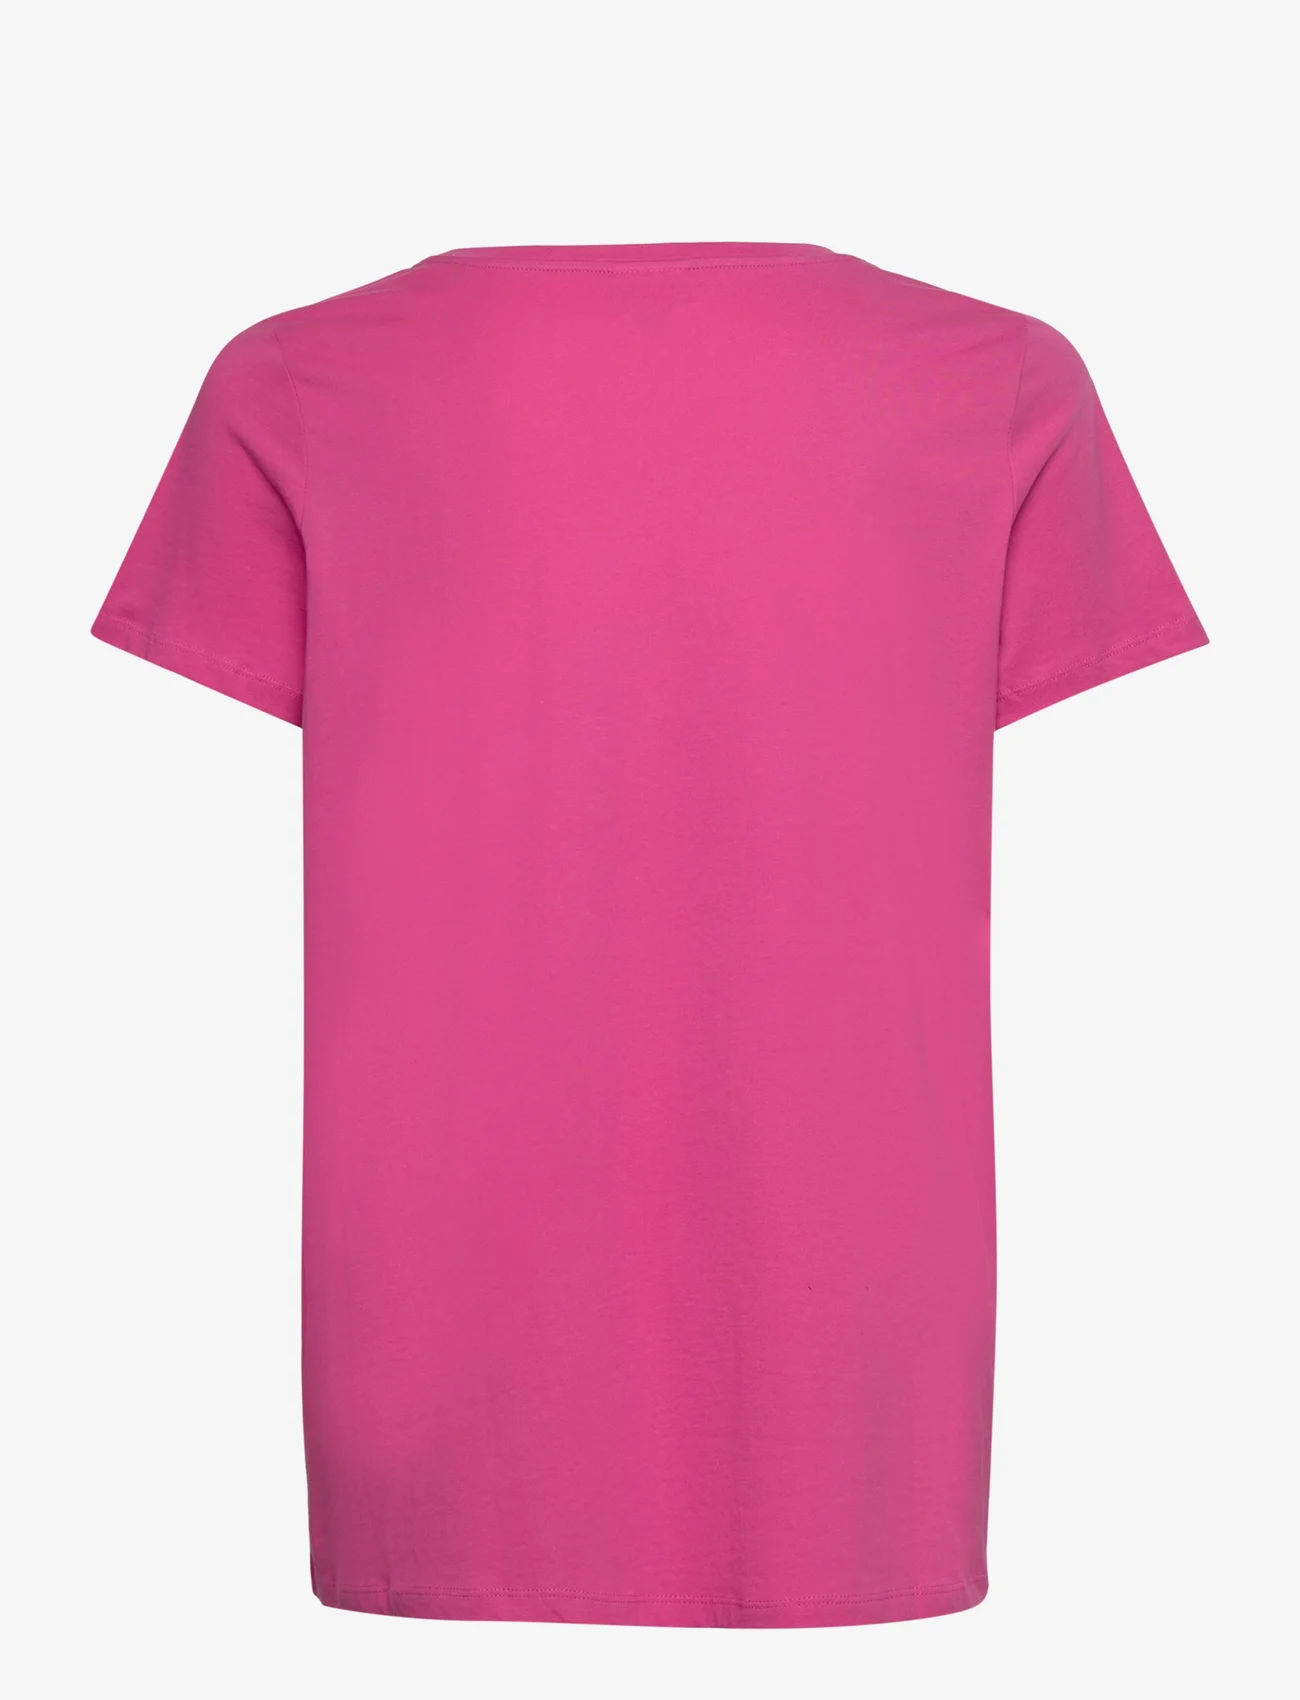 ONLY Carmakoma - CARBONNIE LIFE S/S V-NECK A-SHAPE TEE - lowest prices - raspberry rose - 1